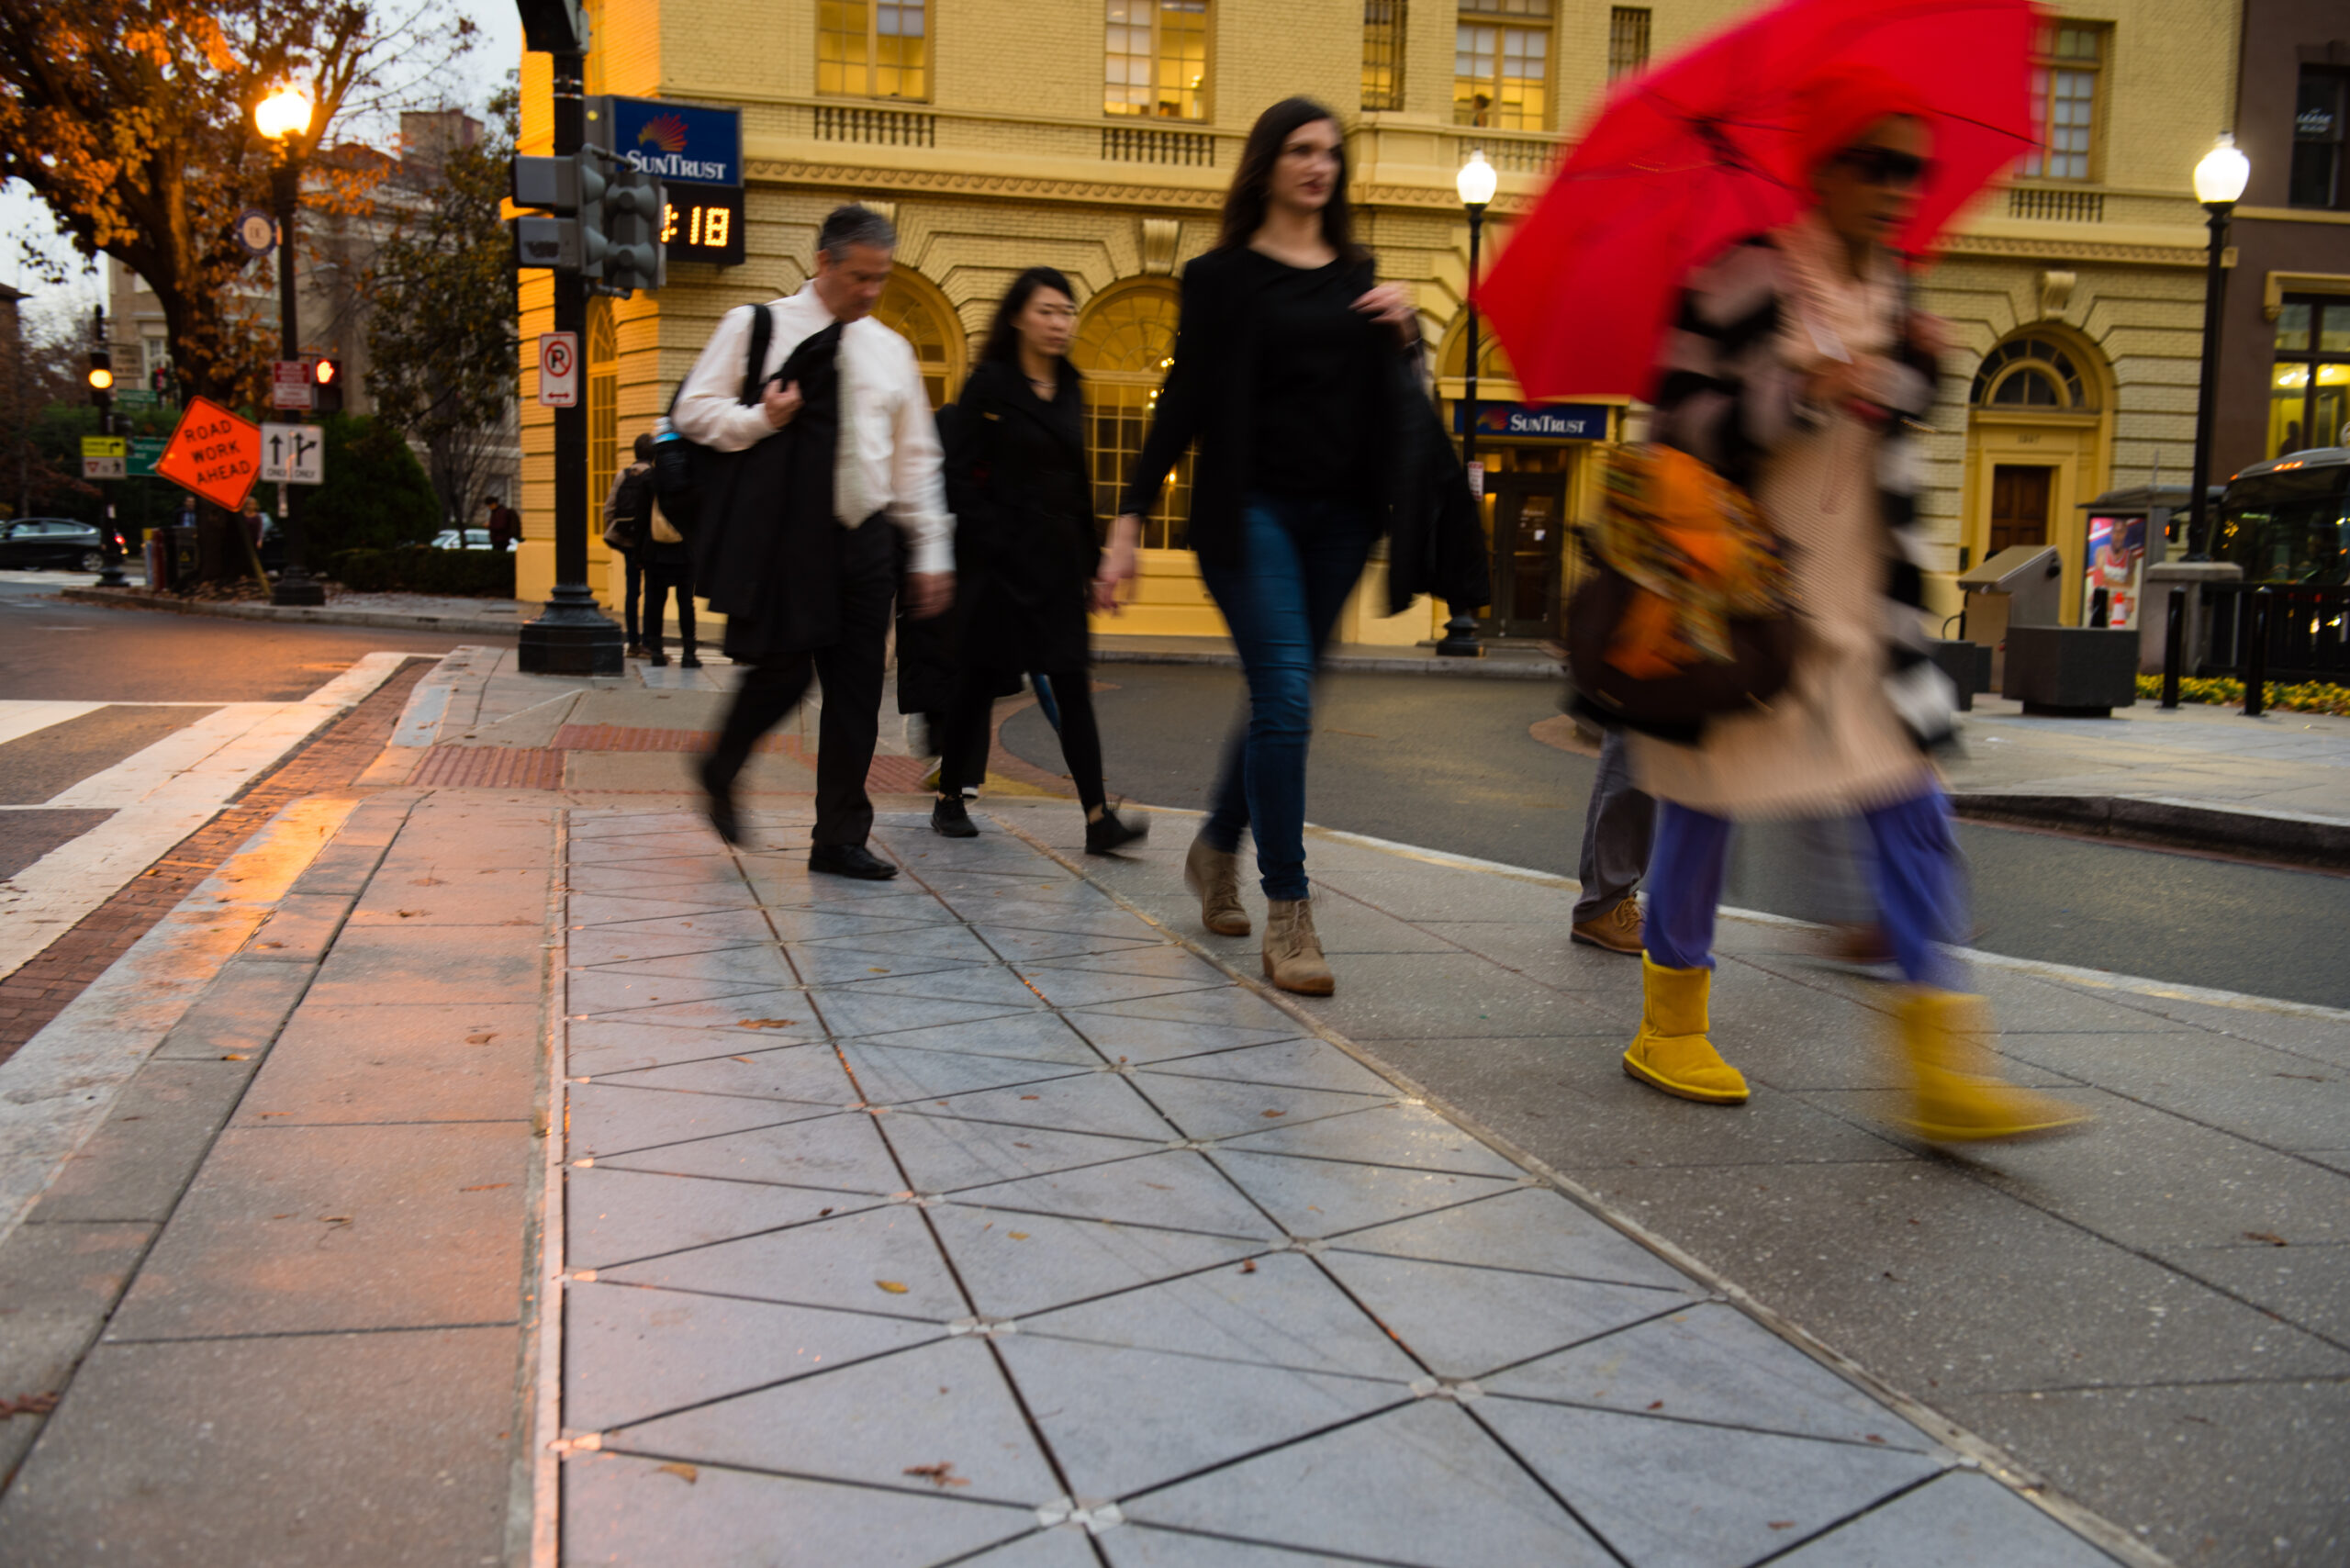 People walk on a pavement made from triangular tiles.